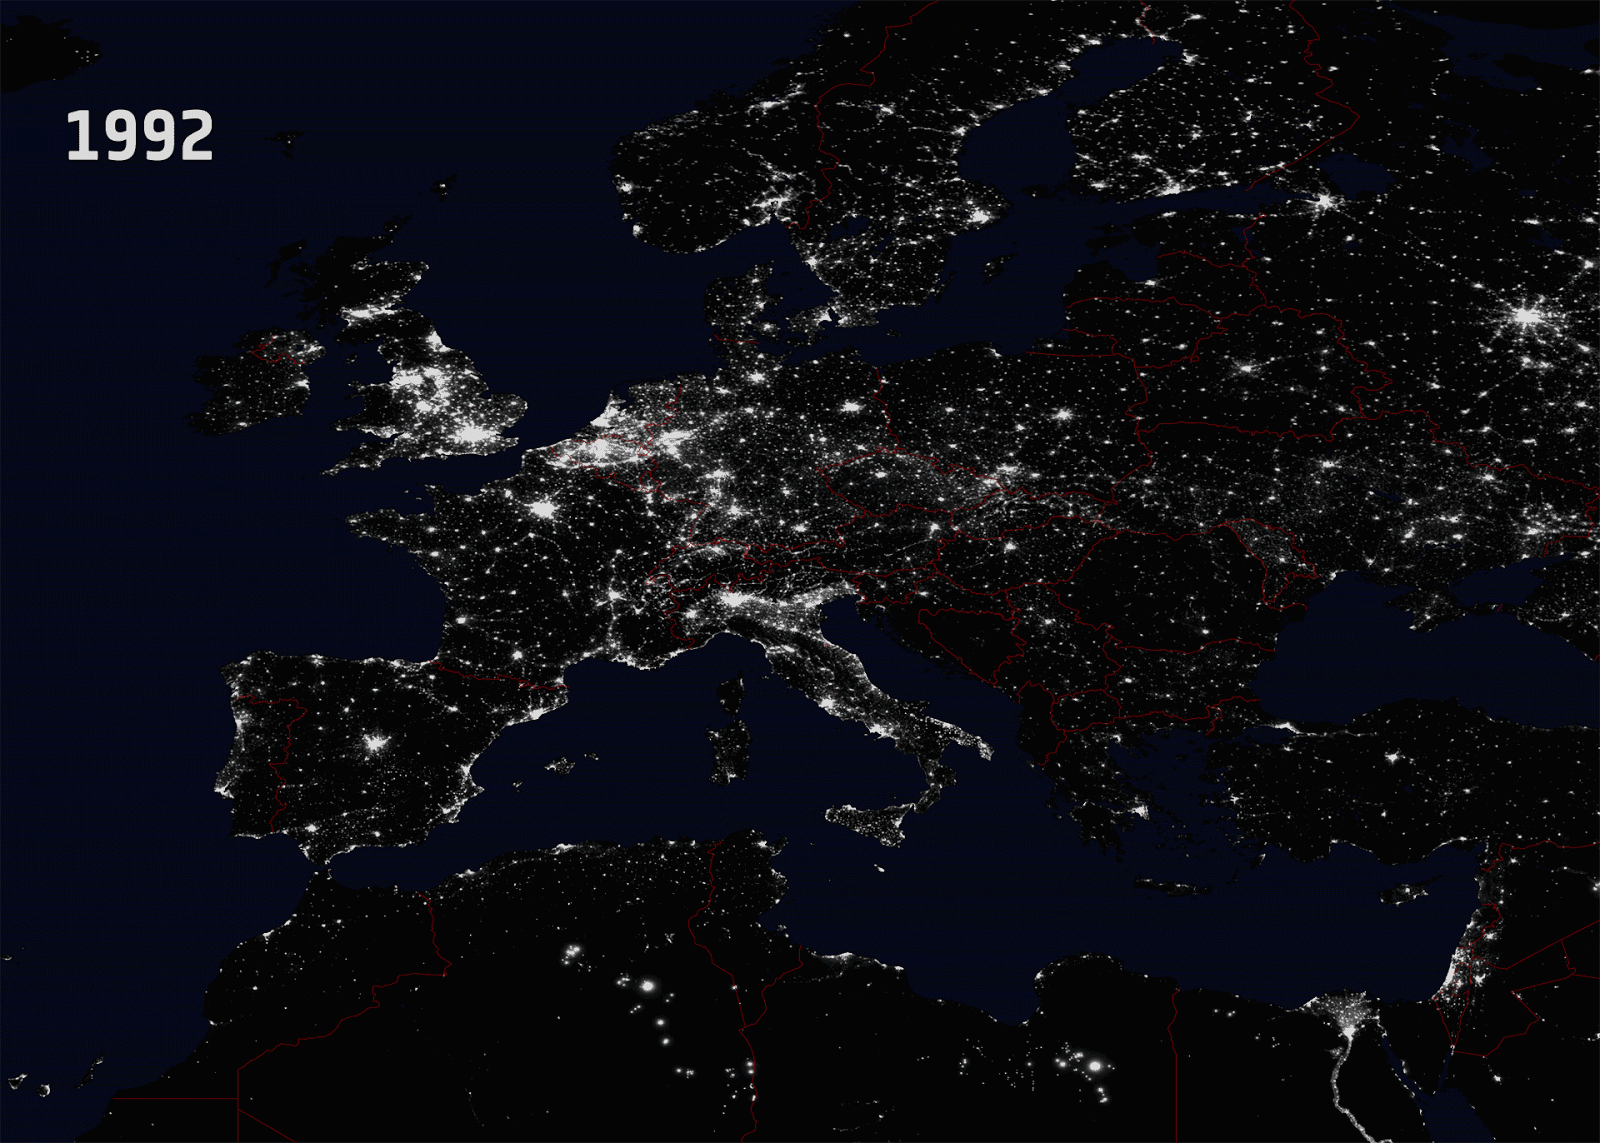 Europe-1992-2010-compare-subset_H